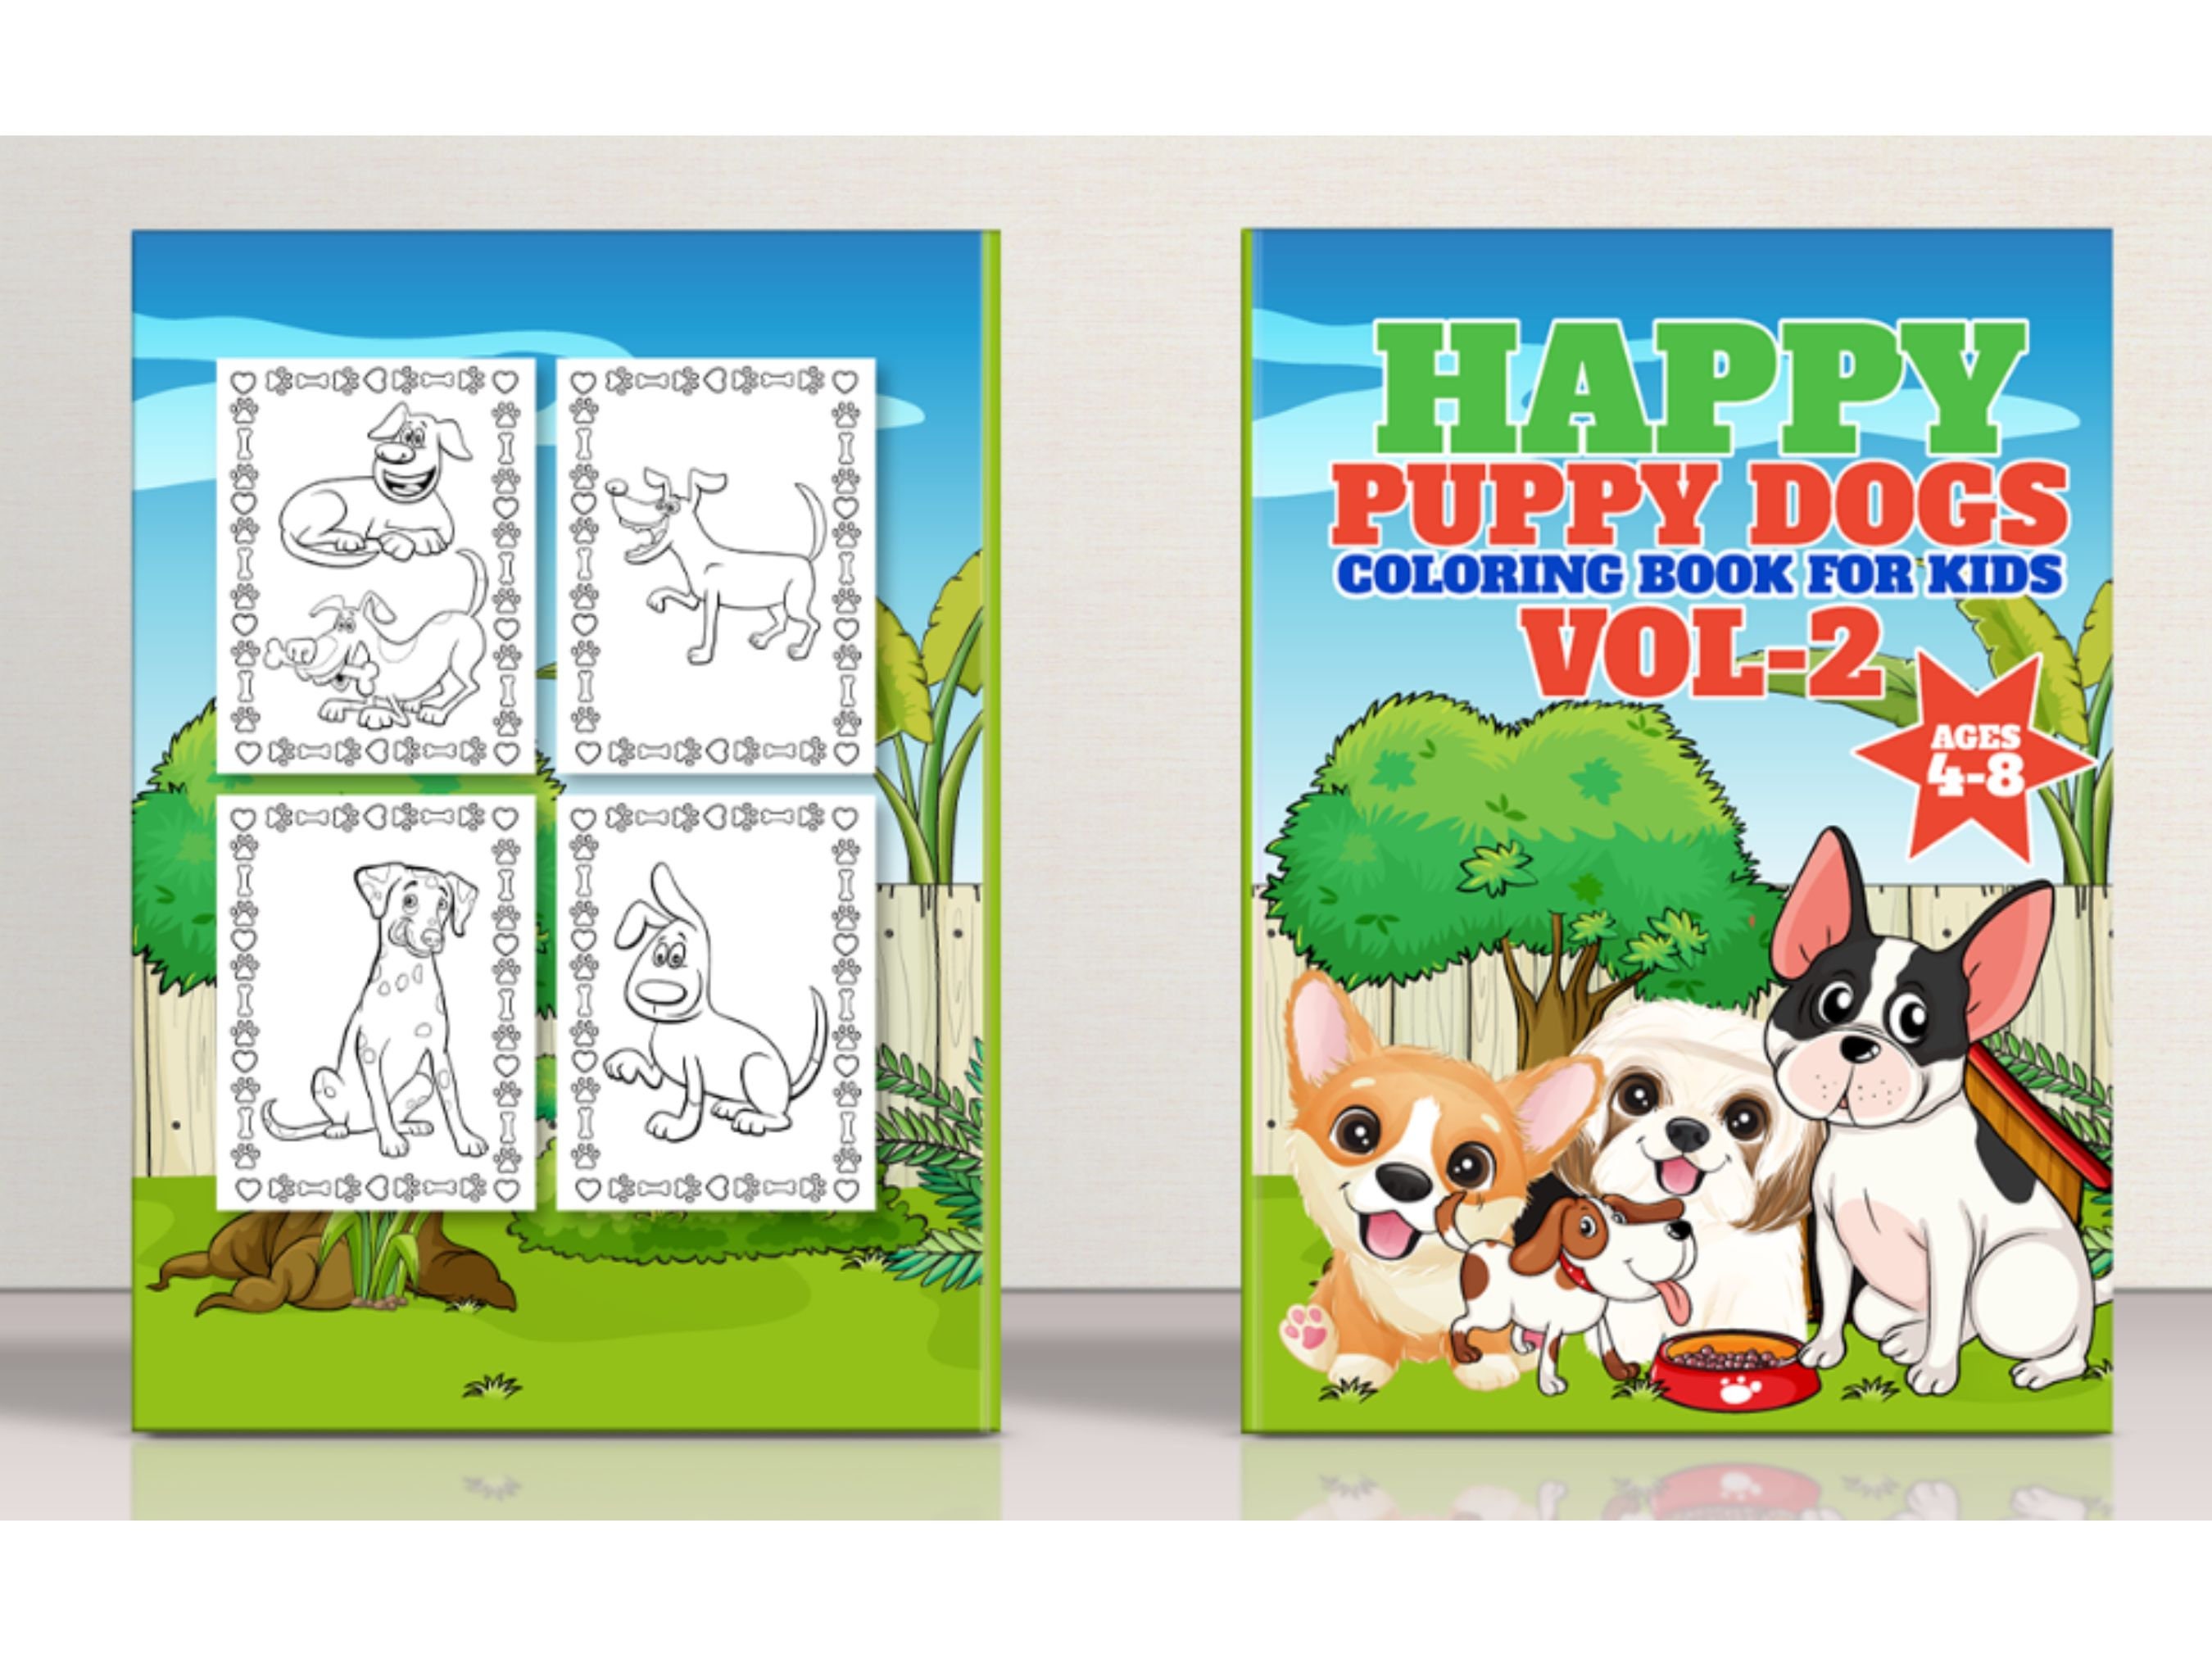 Cute Dogs Coloring Pages For Kids Age 4-8 : 12 Adorable Cartoon